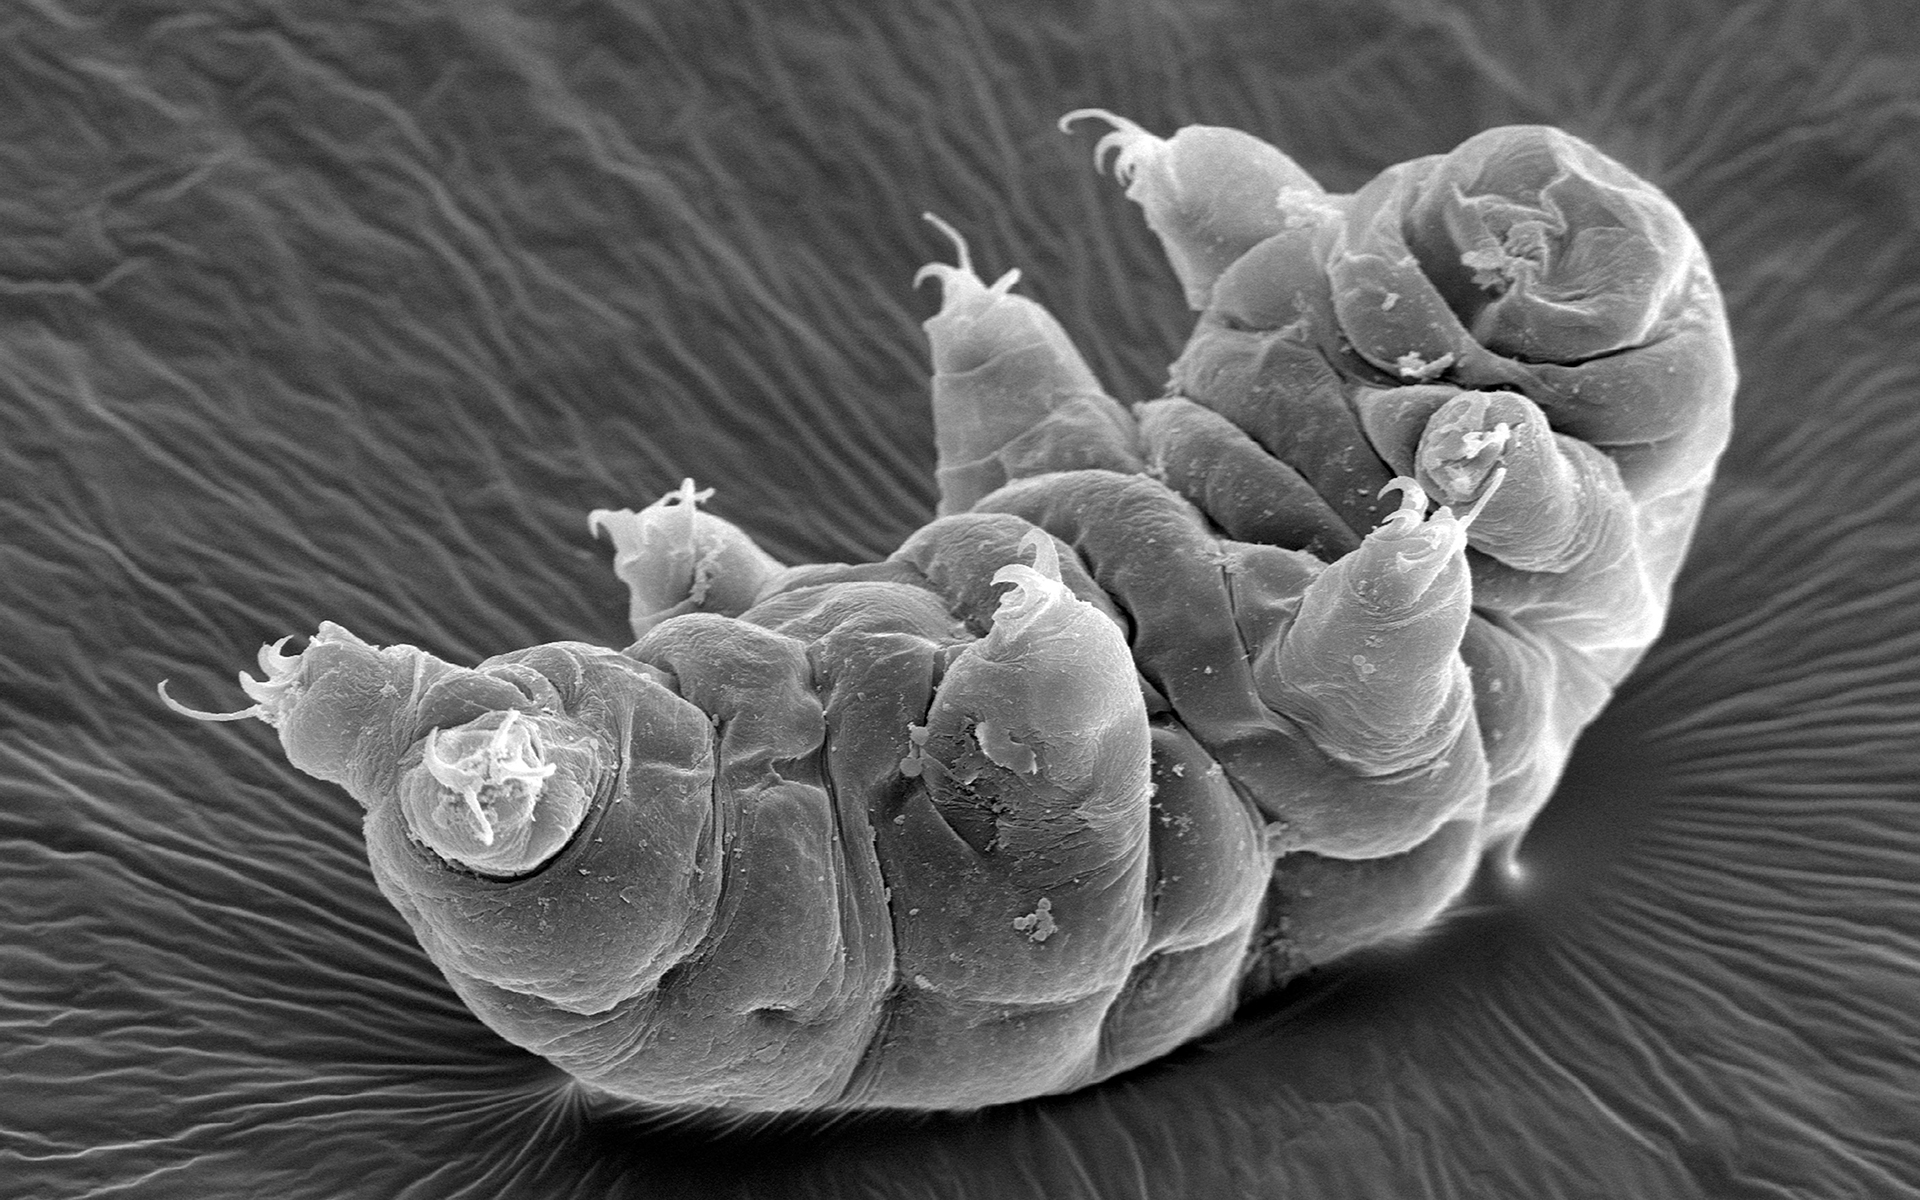 To a tardigrade, our colorful world may be a drab black-and-white.